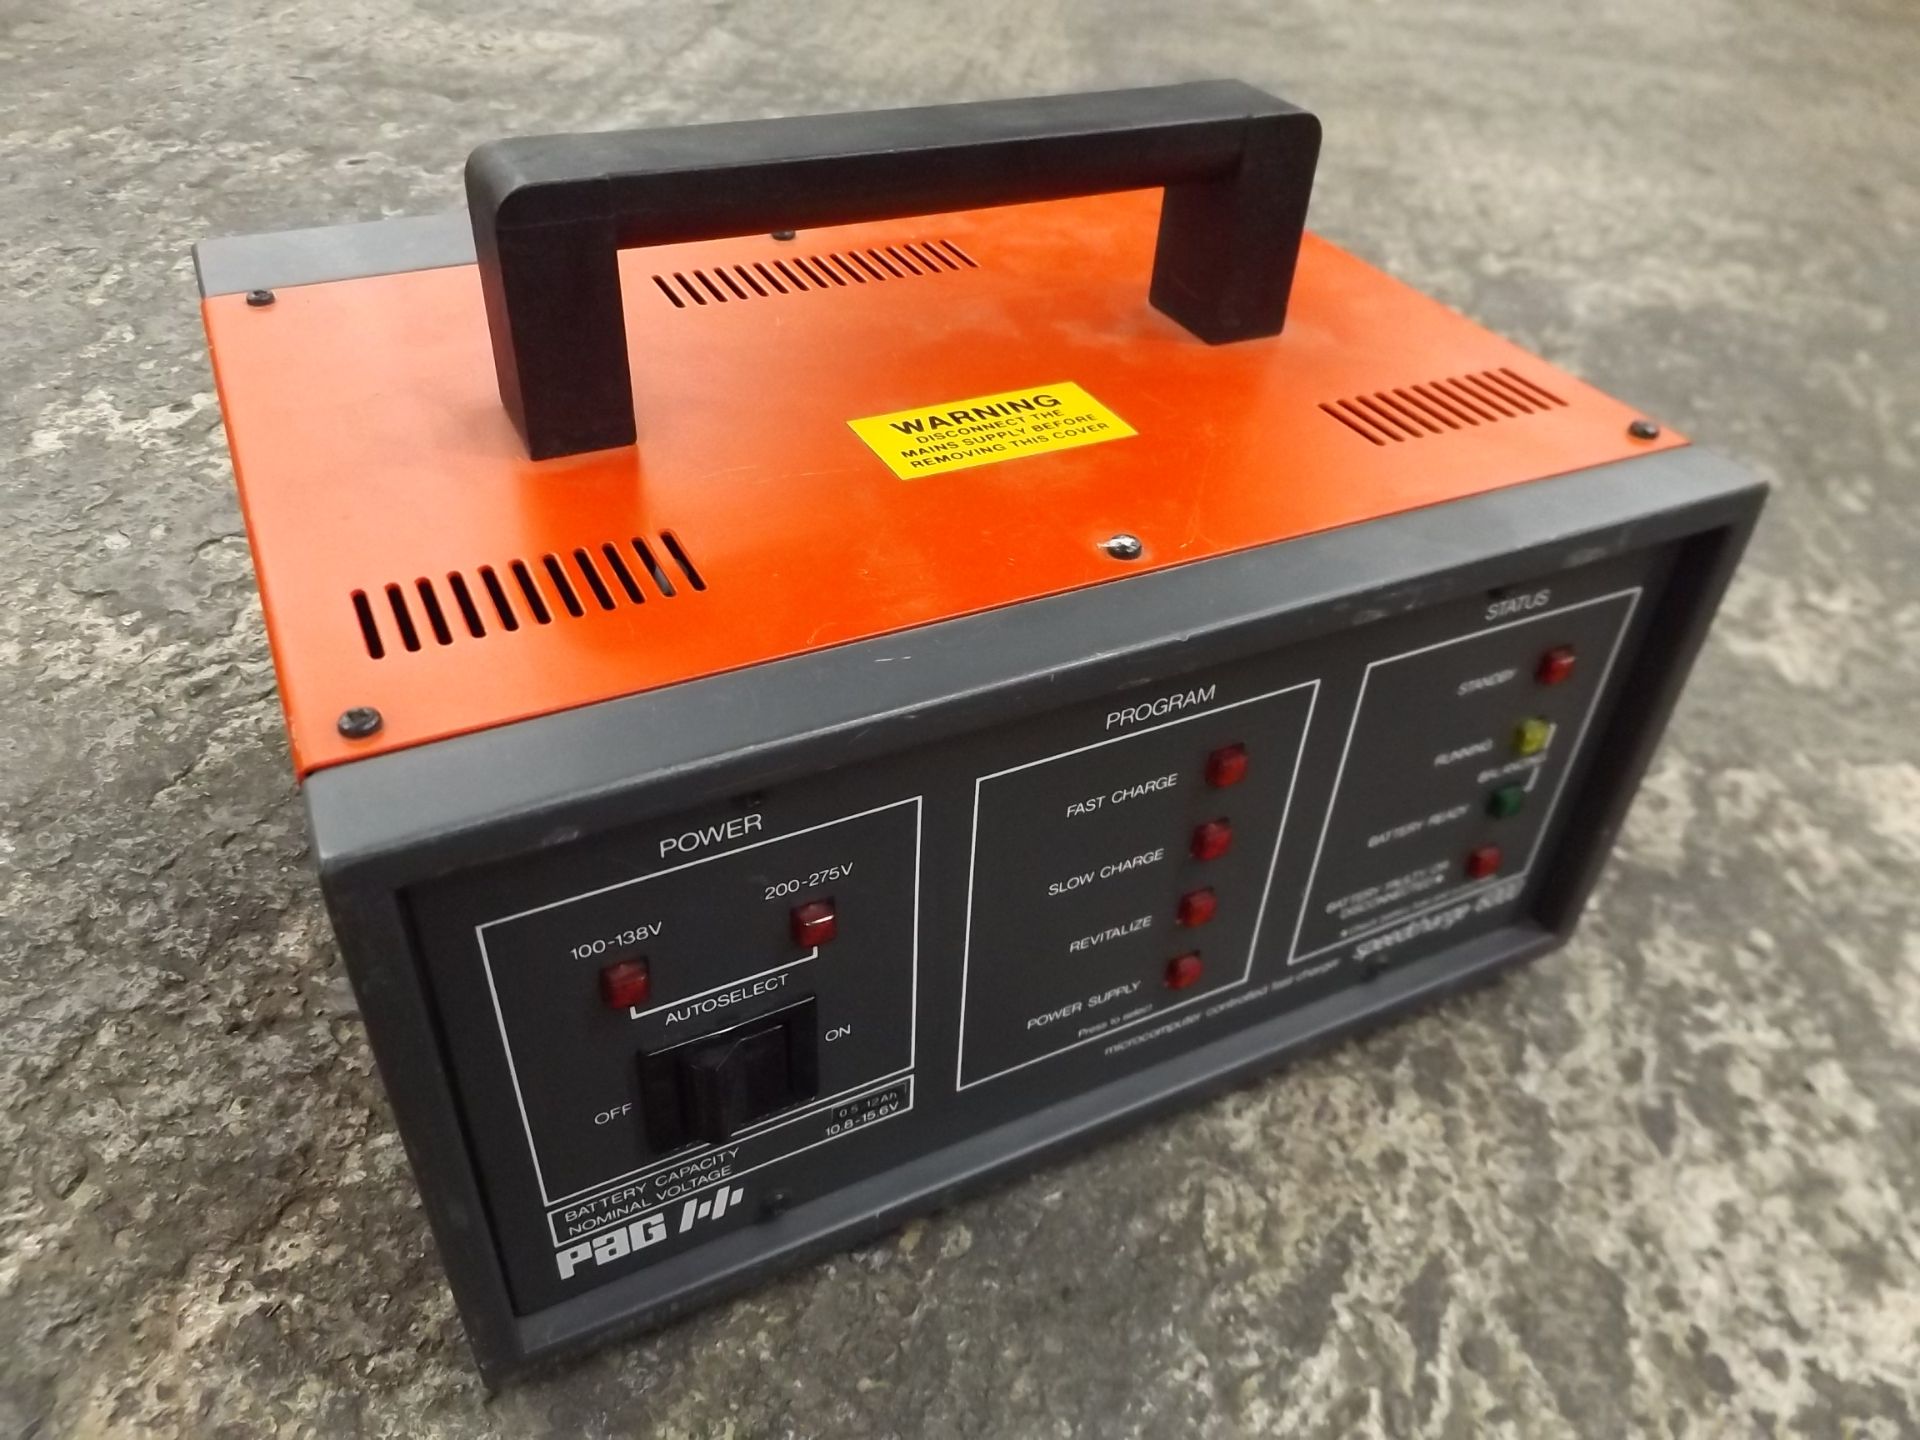 PAG Speedcharge 6000 Battery Charger